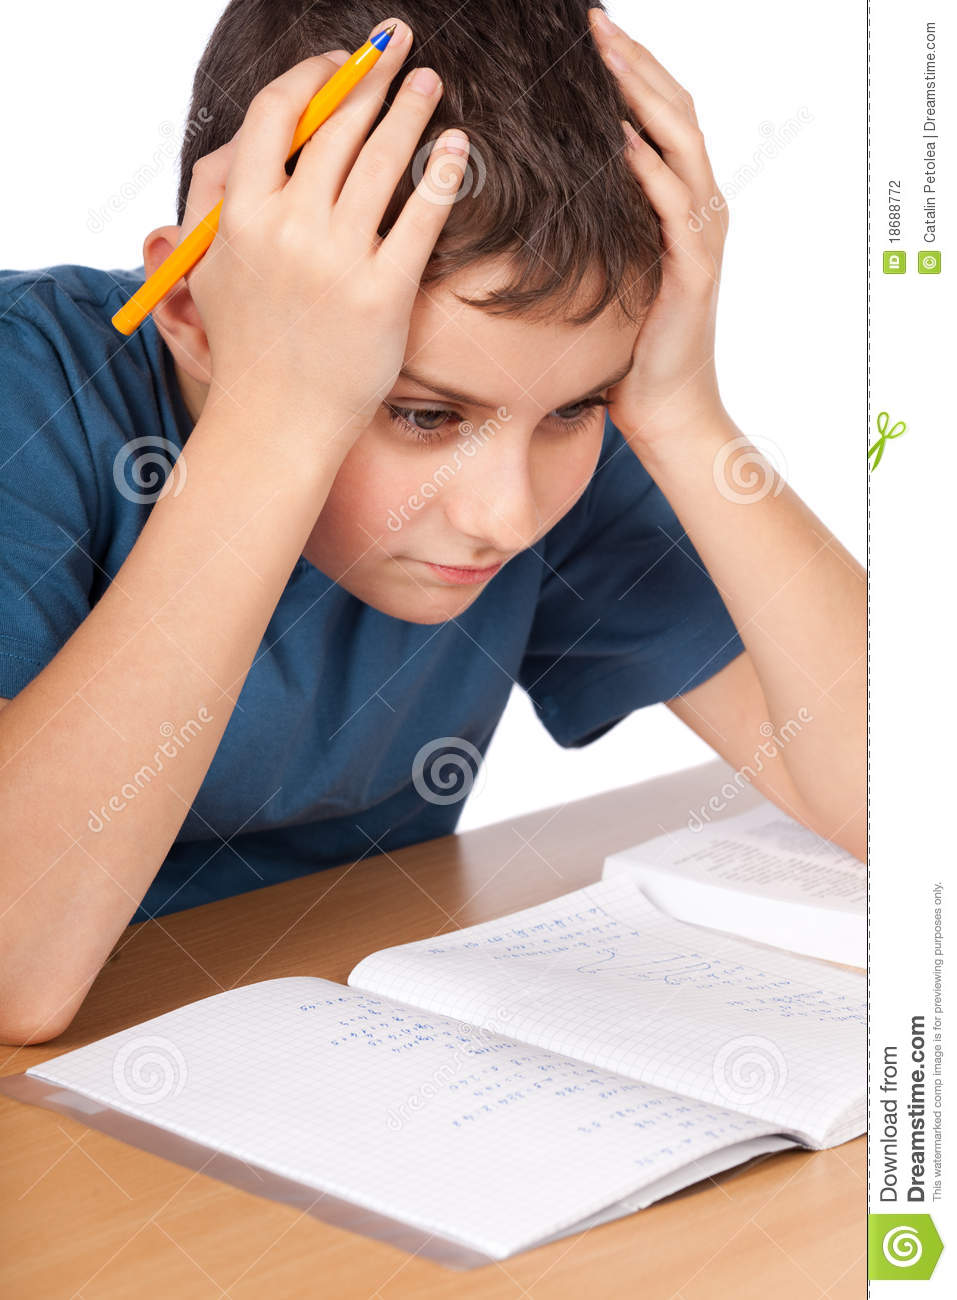 Being Stressed By His Homework Isolated On White Background